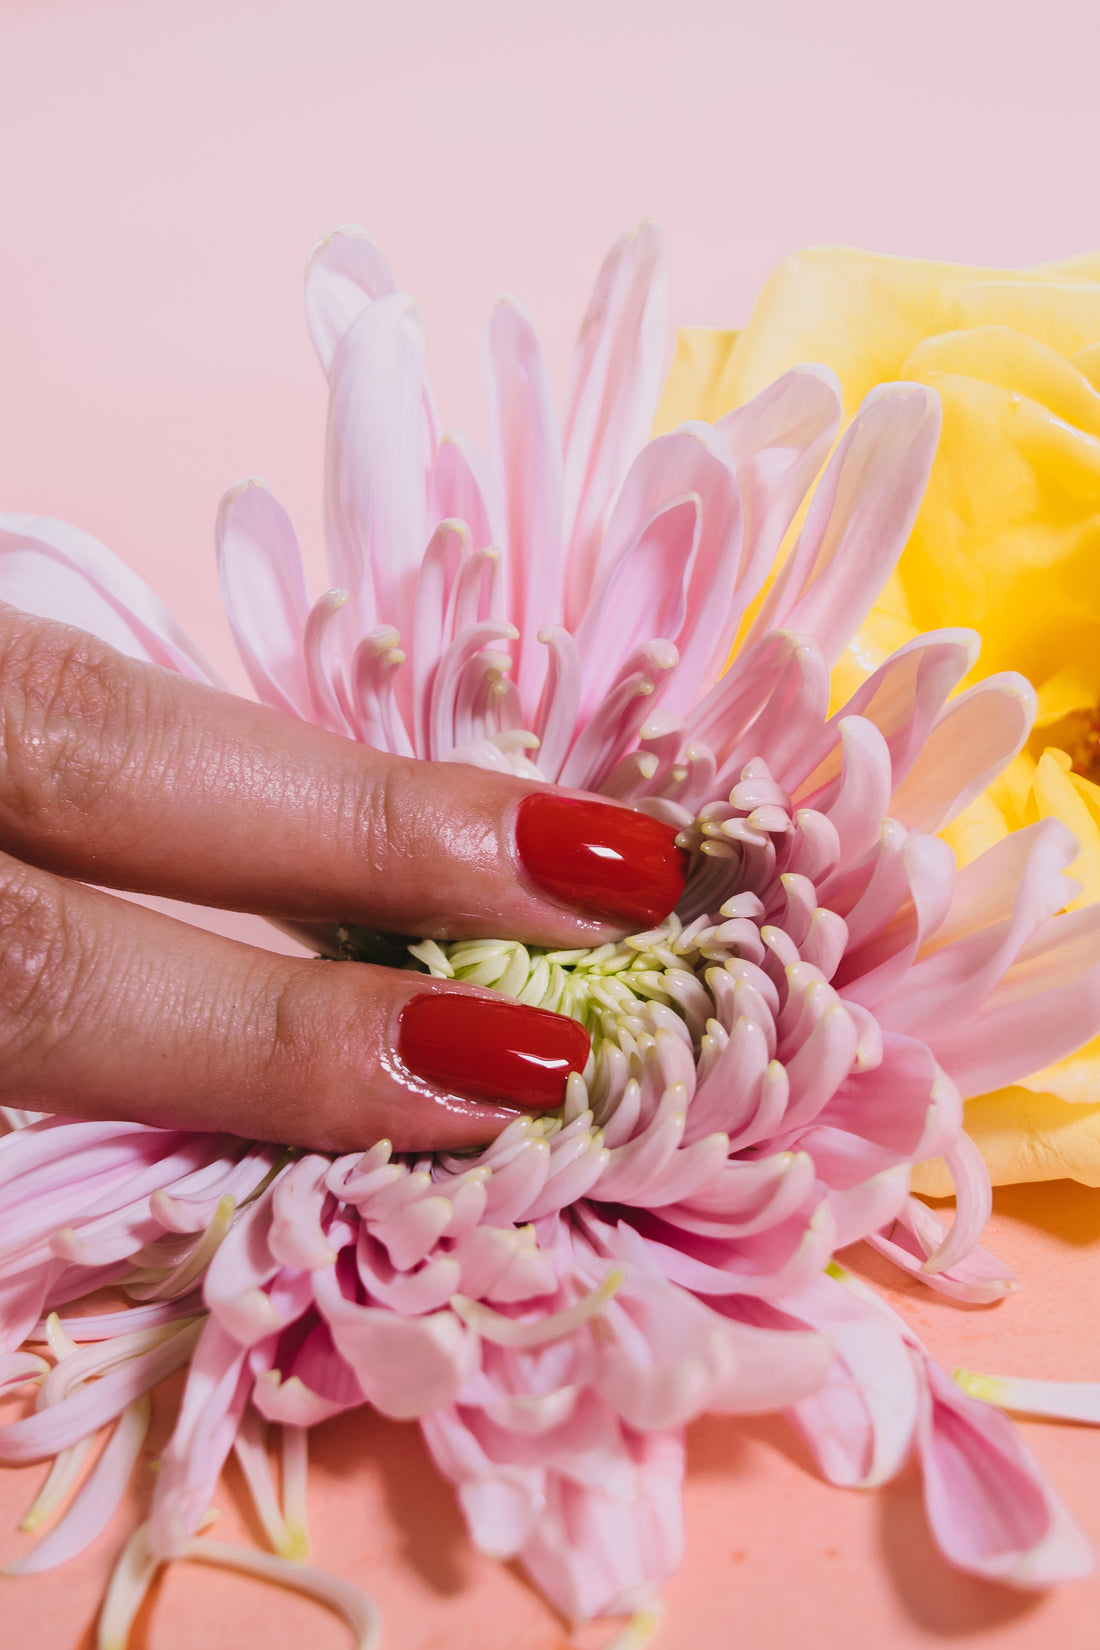 How To Strengthen Nails Naturally in Just 2 Weeks! | Living, by Maggie